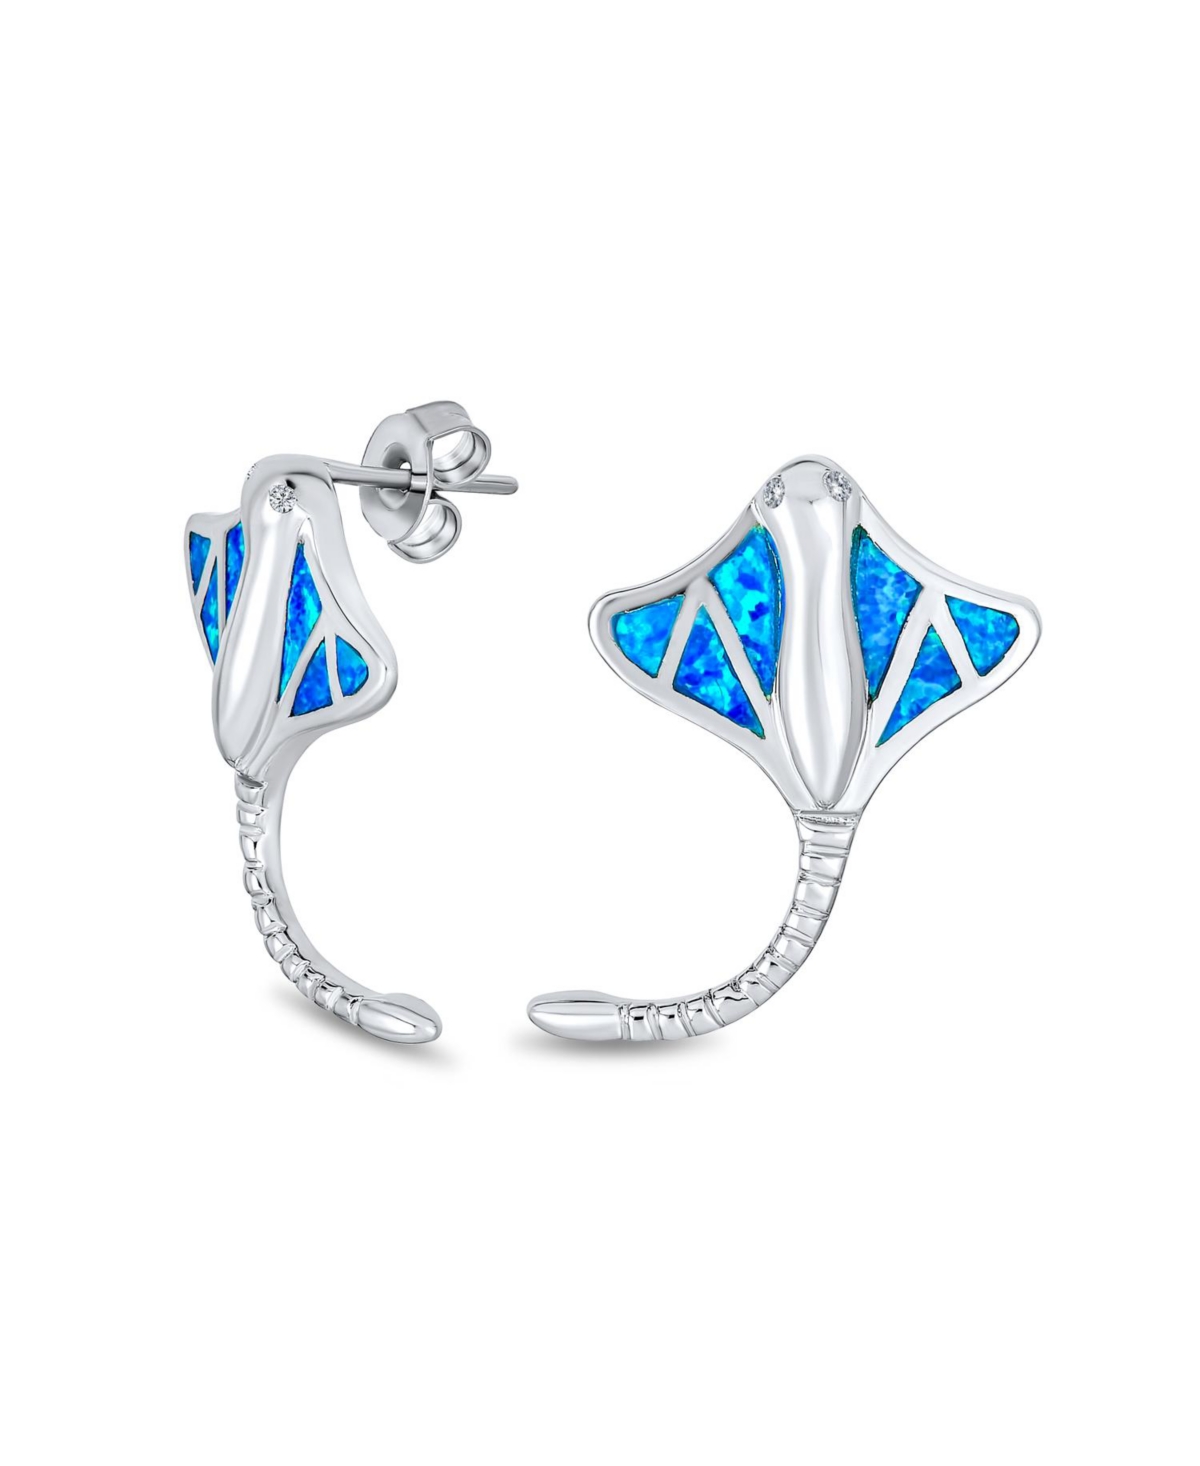 Nautical Blue Inlay Created Opal Large Stingray Stud Earrings For Women.925 Sterling Silver October Birthstone - Silver blue